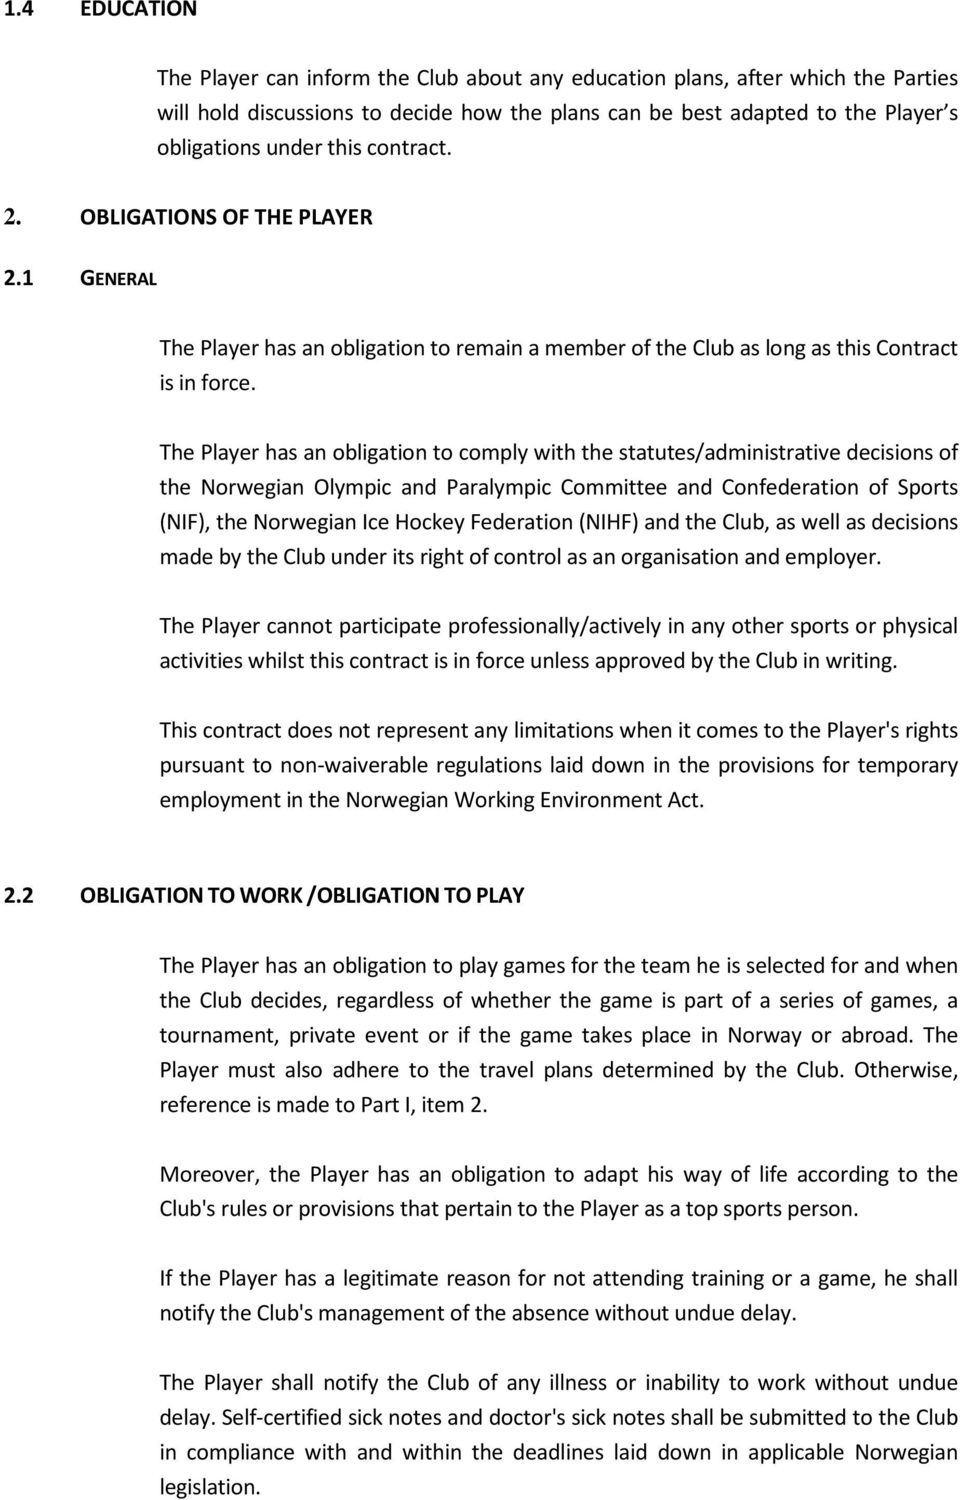 The Player has an obligation to comply with the statutes/administrative decisions of the Norwegian Olympic and Paralympic Committee and Confederation of Sports (NIF), the Norwegian Ice Hockey